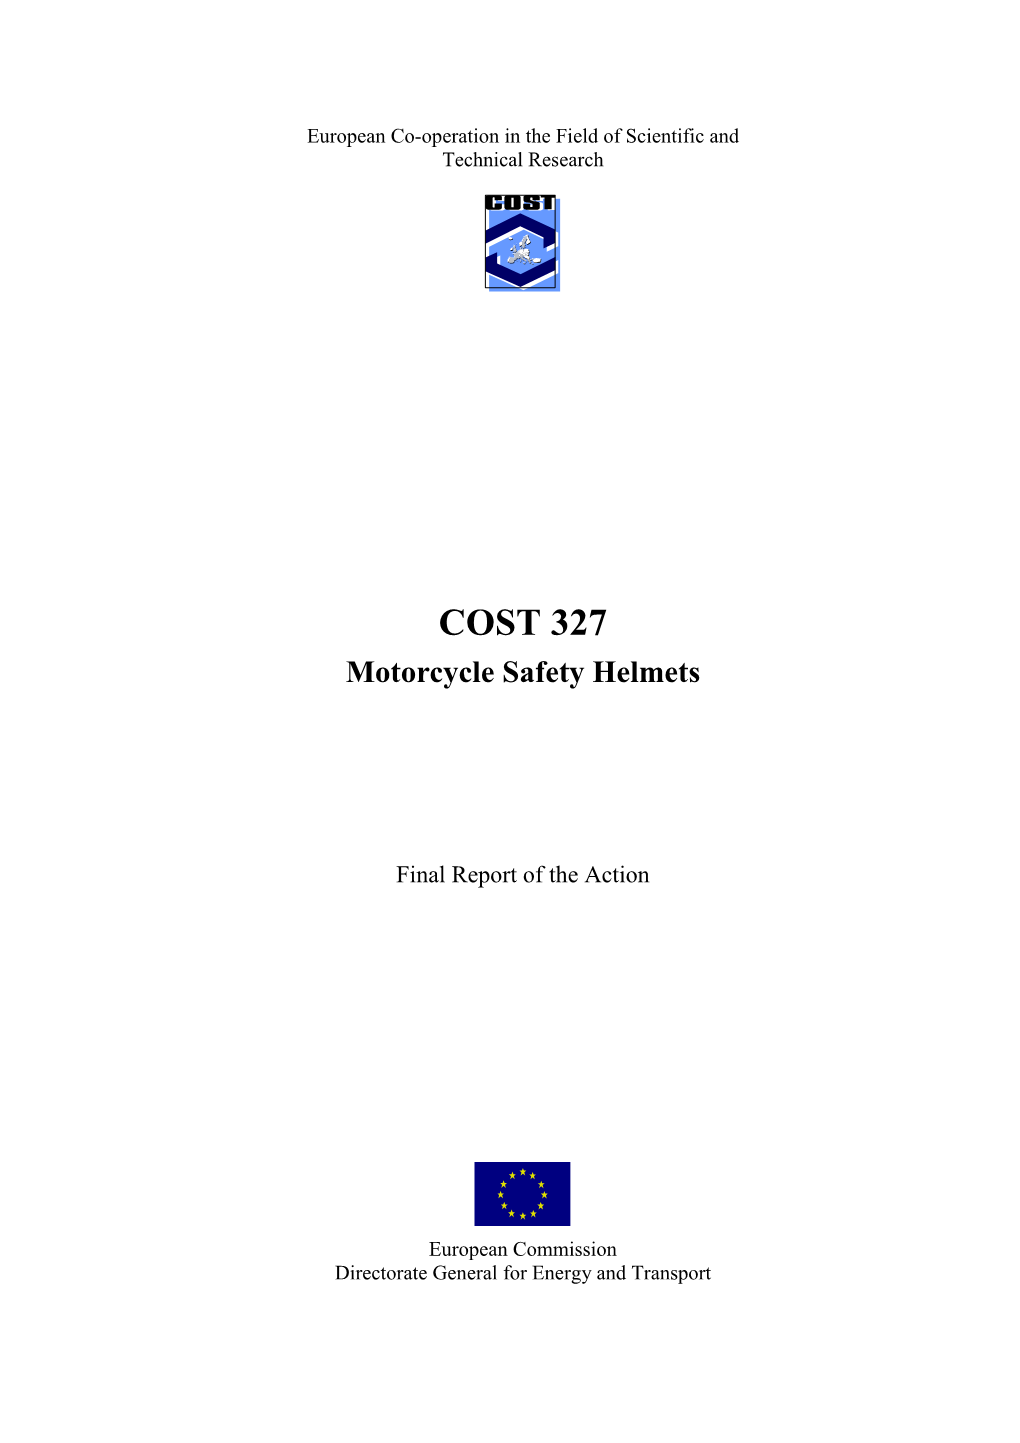 COST 327 Motorcycle Safety Helmets Final Report